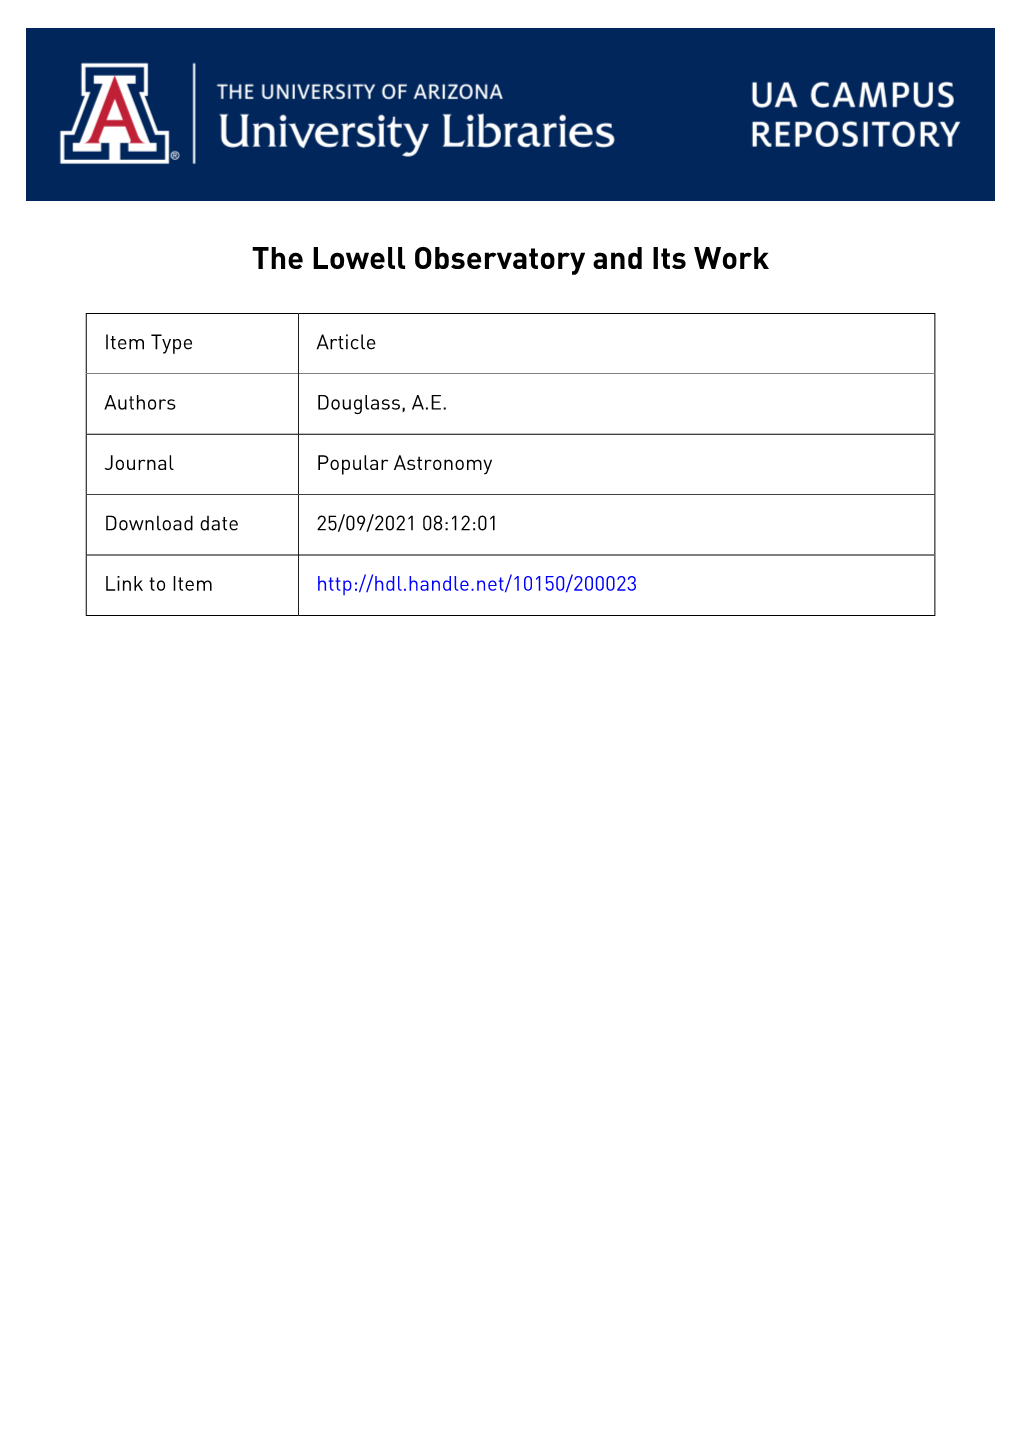 The Lowell Observatory and Its Work